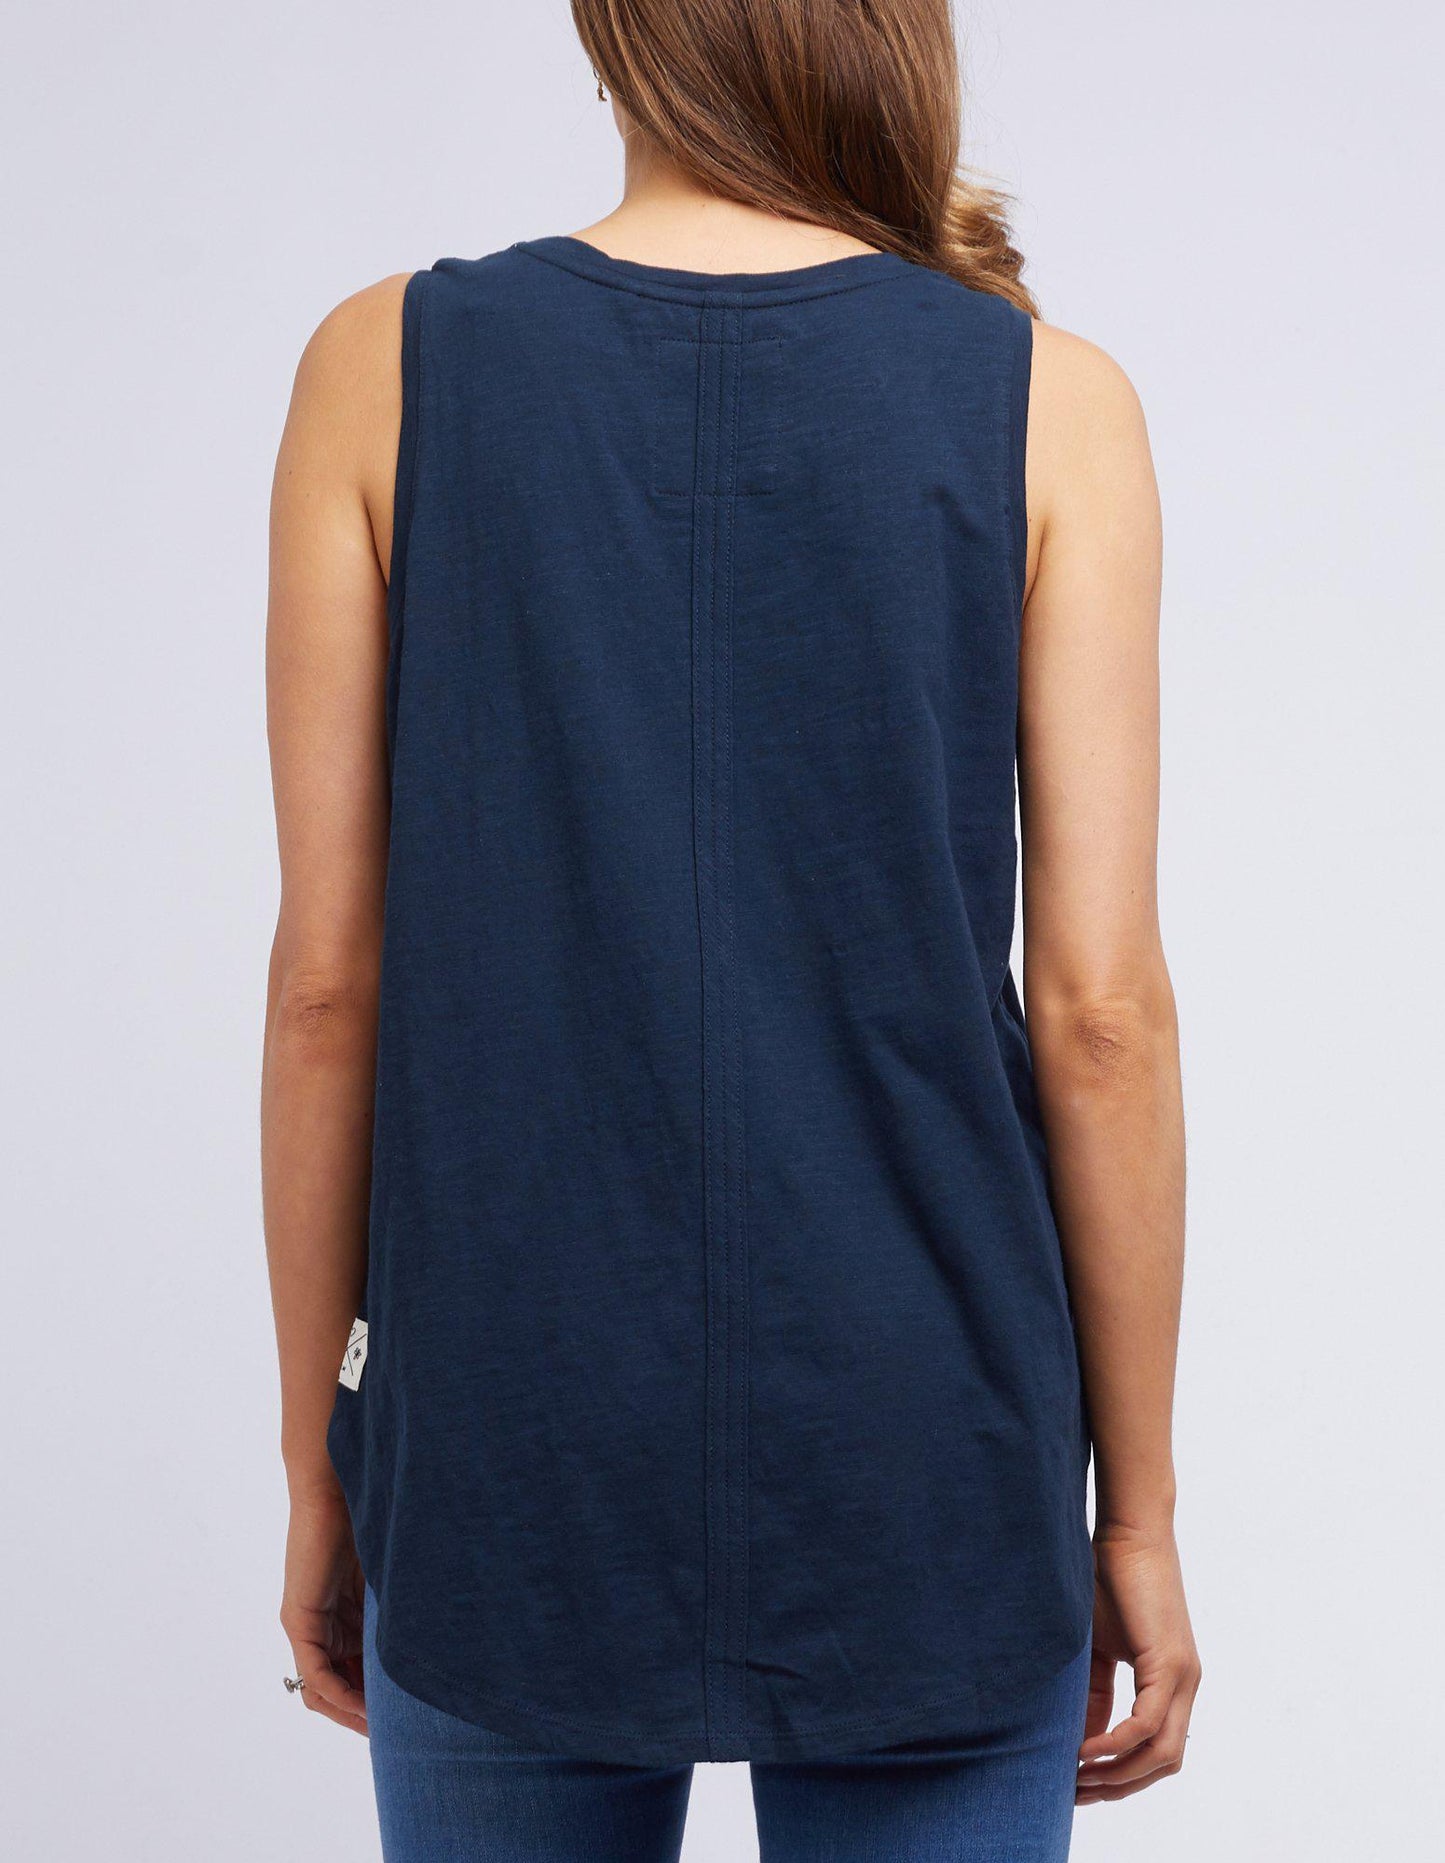 Scoop Tank - Navy - Elm Lifestyle - FUDGE Gifts Home Lifestyle